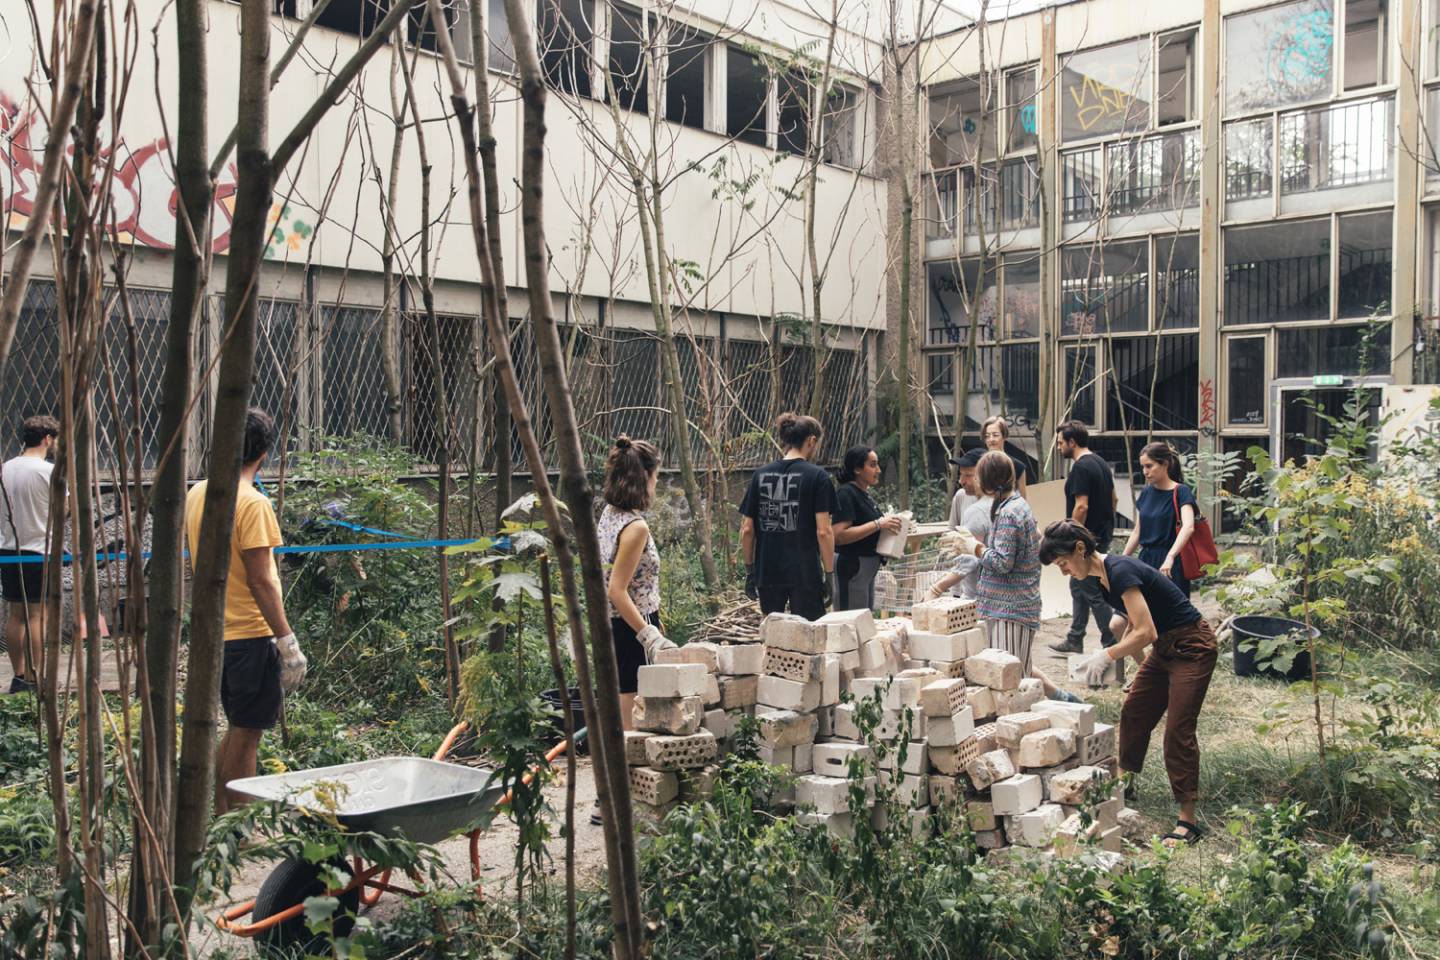 A group of people building with bricks in a backyard.